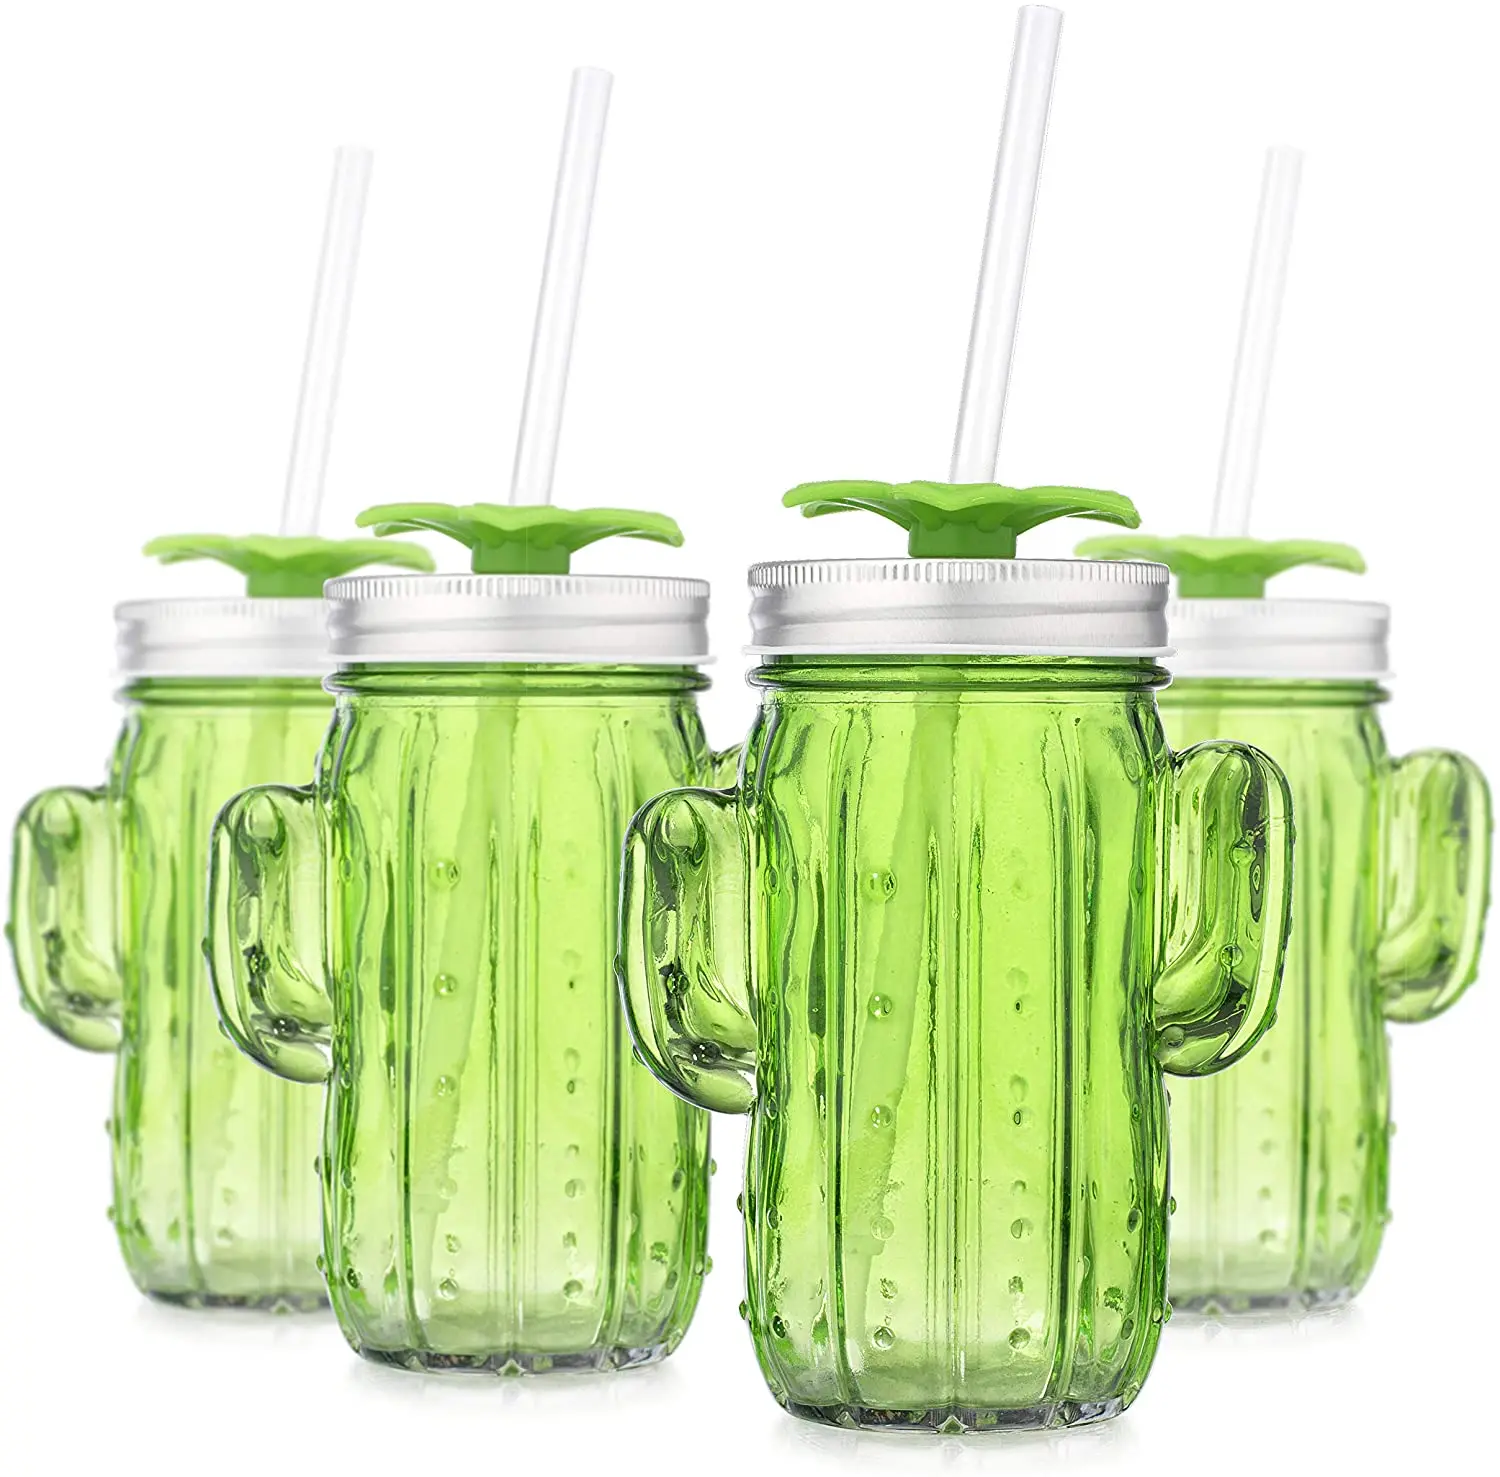 6 Pack 16 Oz. Mason Jar Mugs with Handle, Tin Lid and Plastic Straws - Old  Fashion Drinking Glasses for Party or Daily Use - China Mason Jars with Lids  and Straws